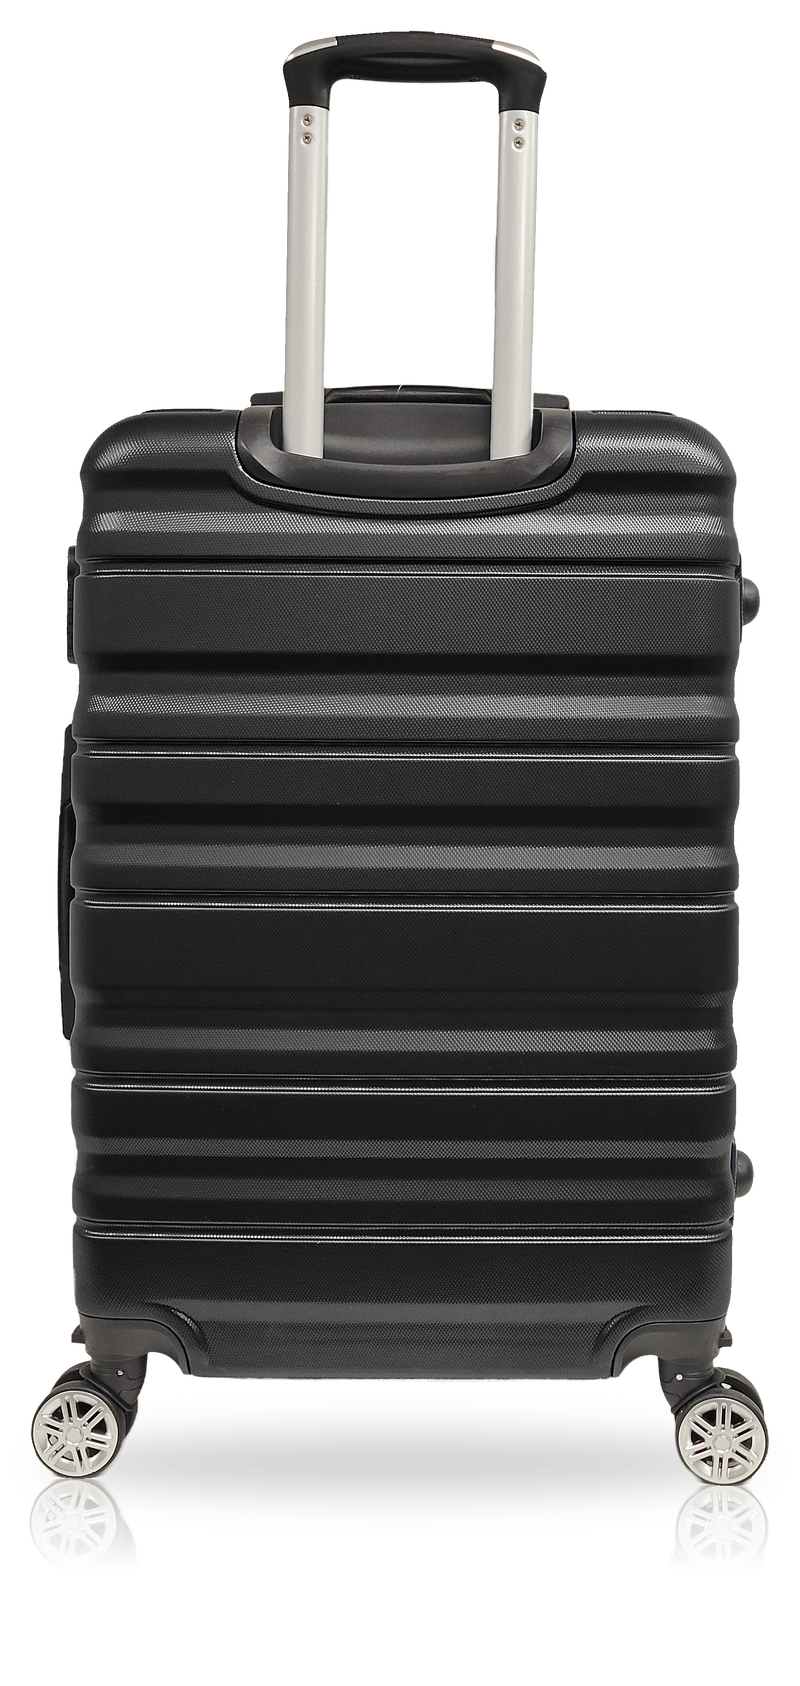 TOSCANO by Tucci 26-inch Magnifica Lightweight Luggage Suitcase